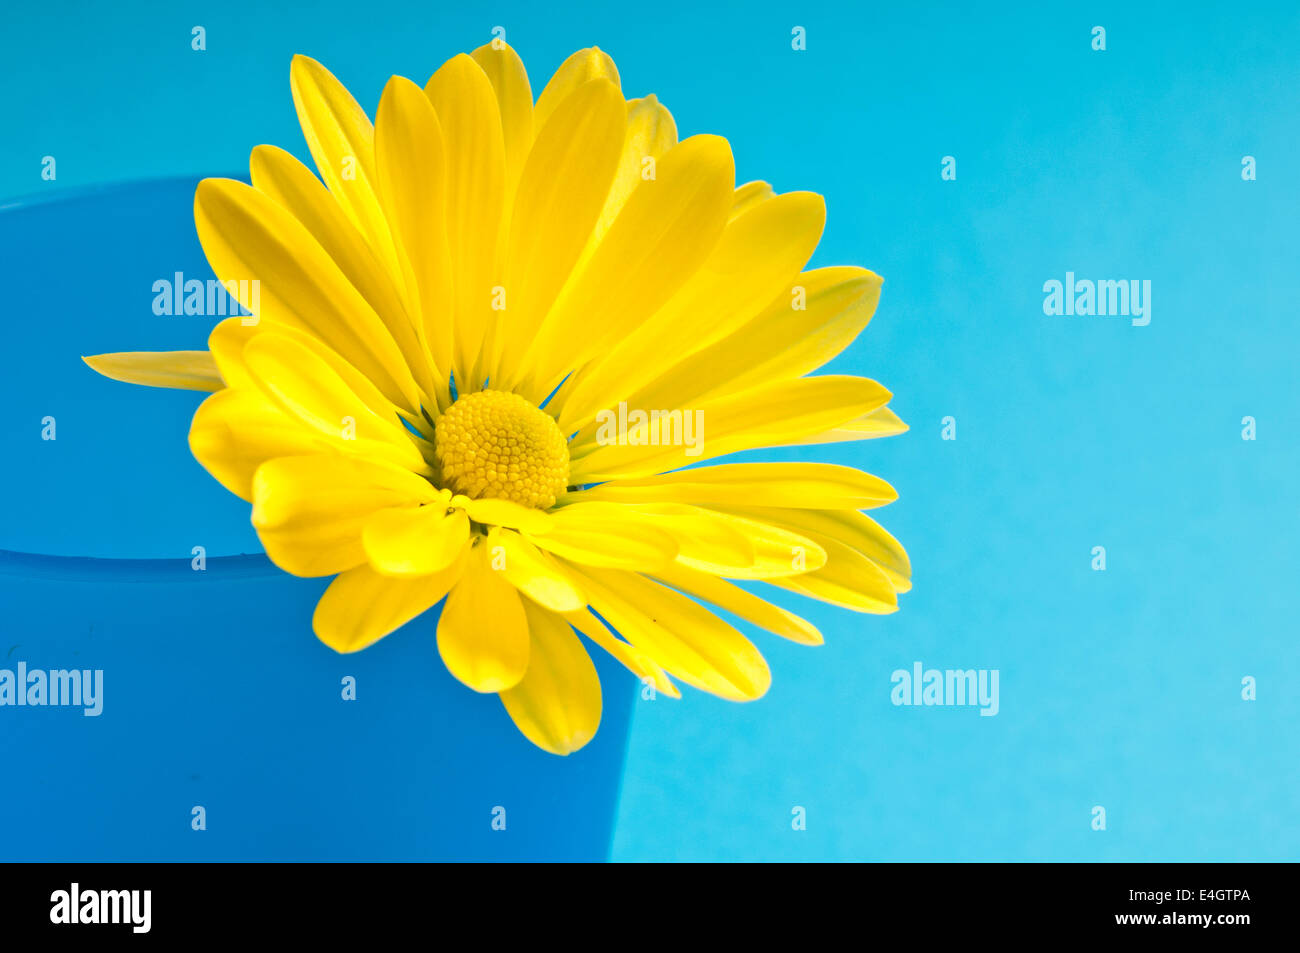 yellow daisy in a blue glass Stock Photo